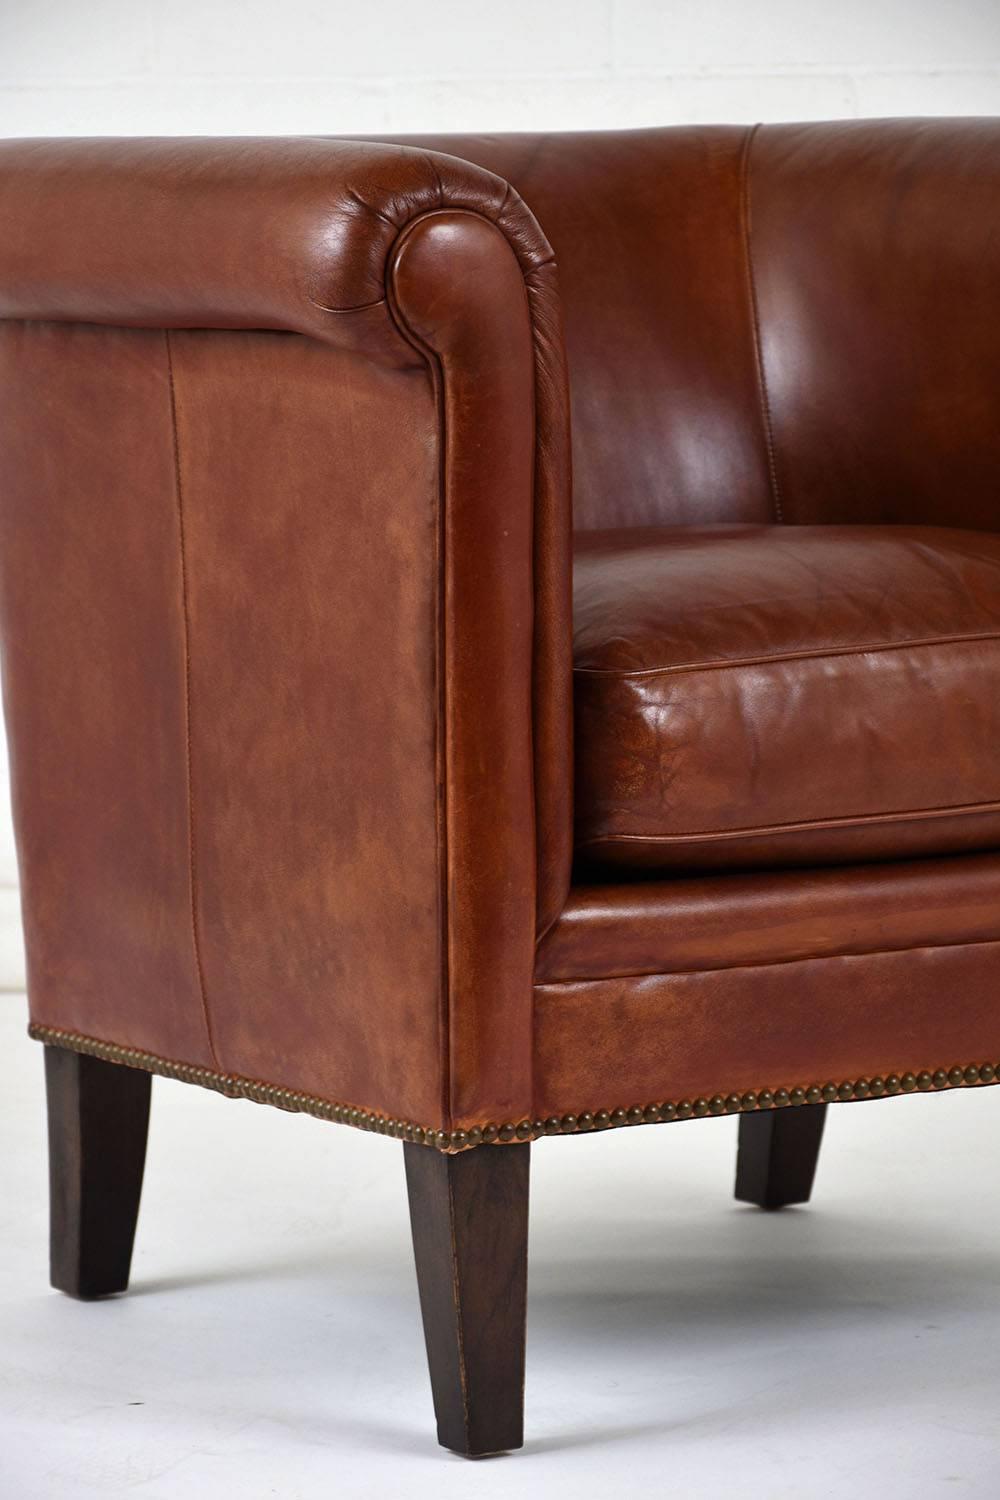 Late 20th Century Pair of Regency-Style Bernhardt Leather Club Chairs